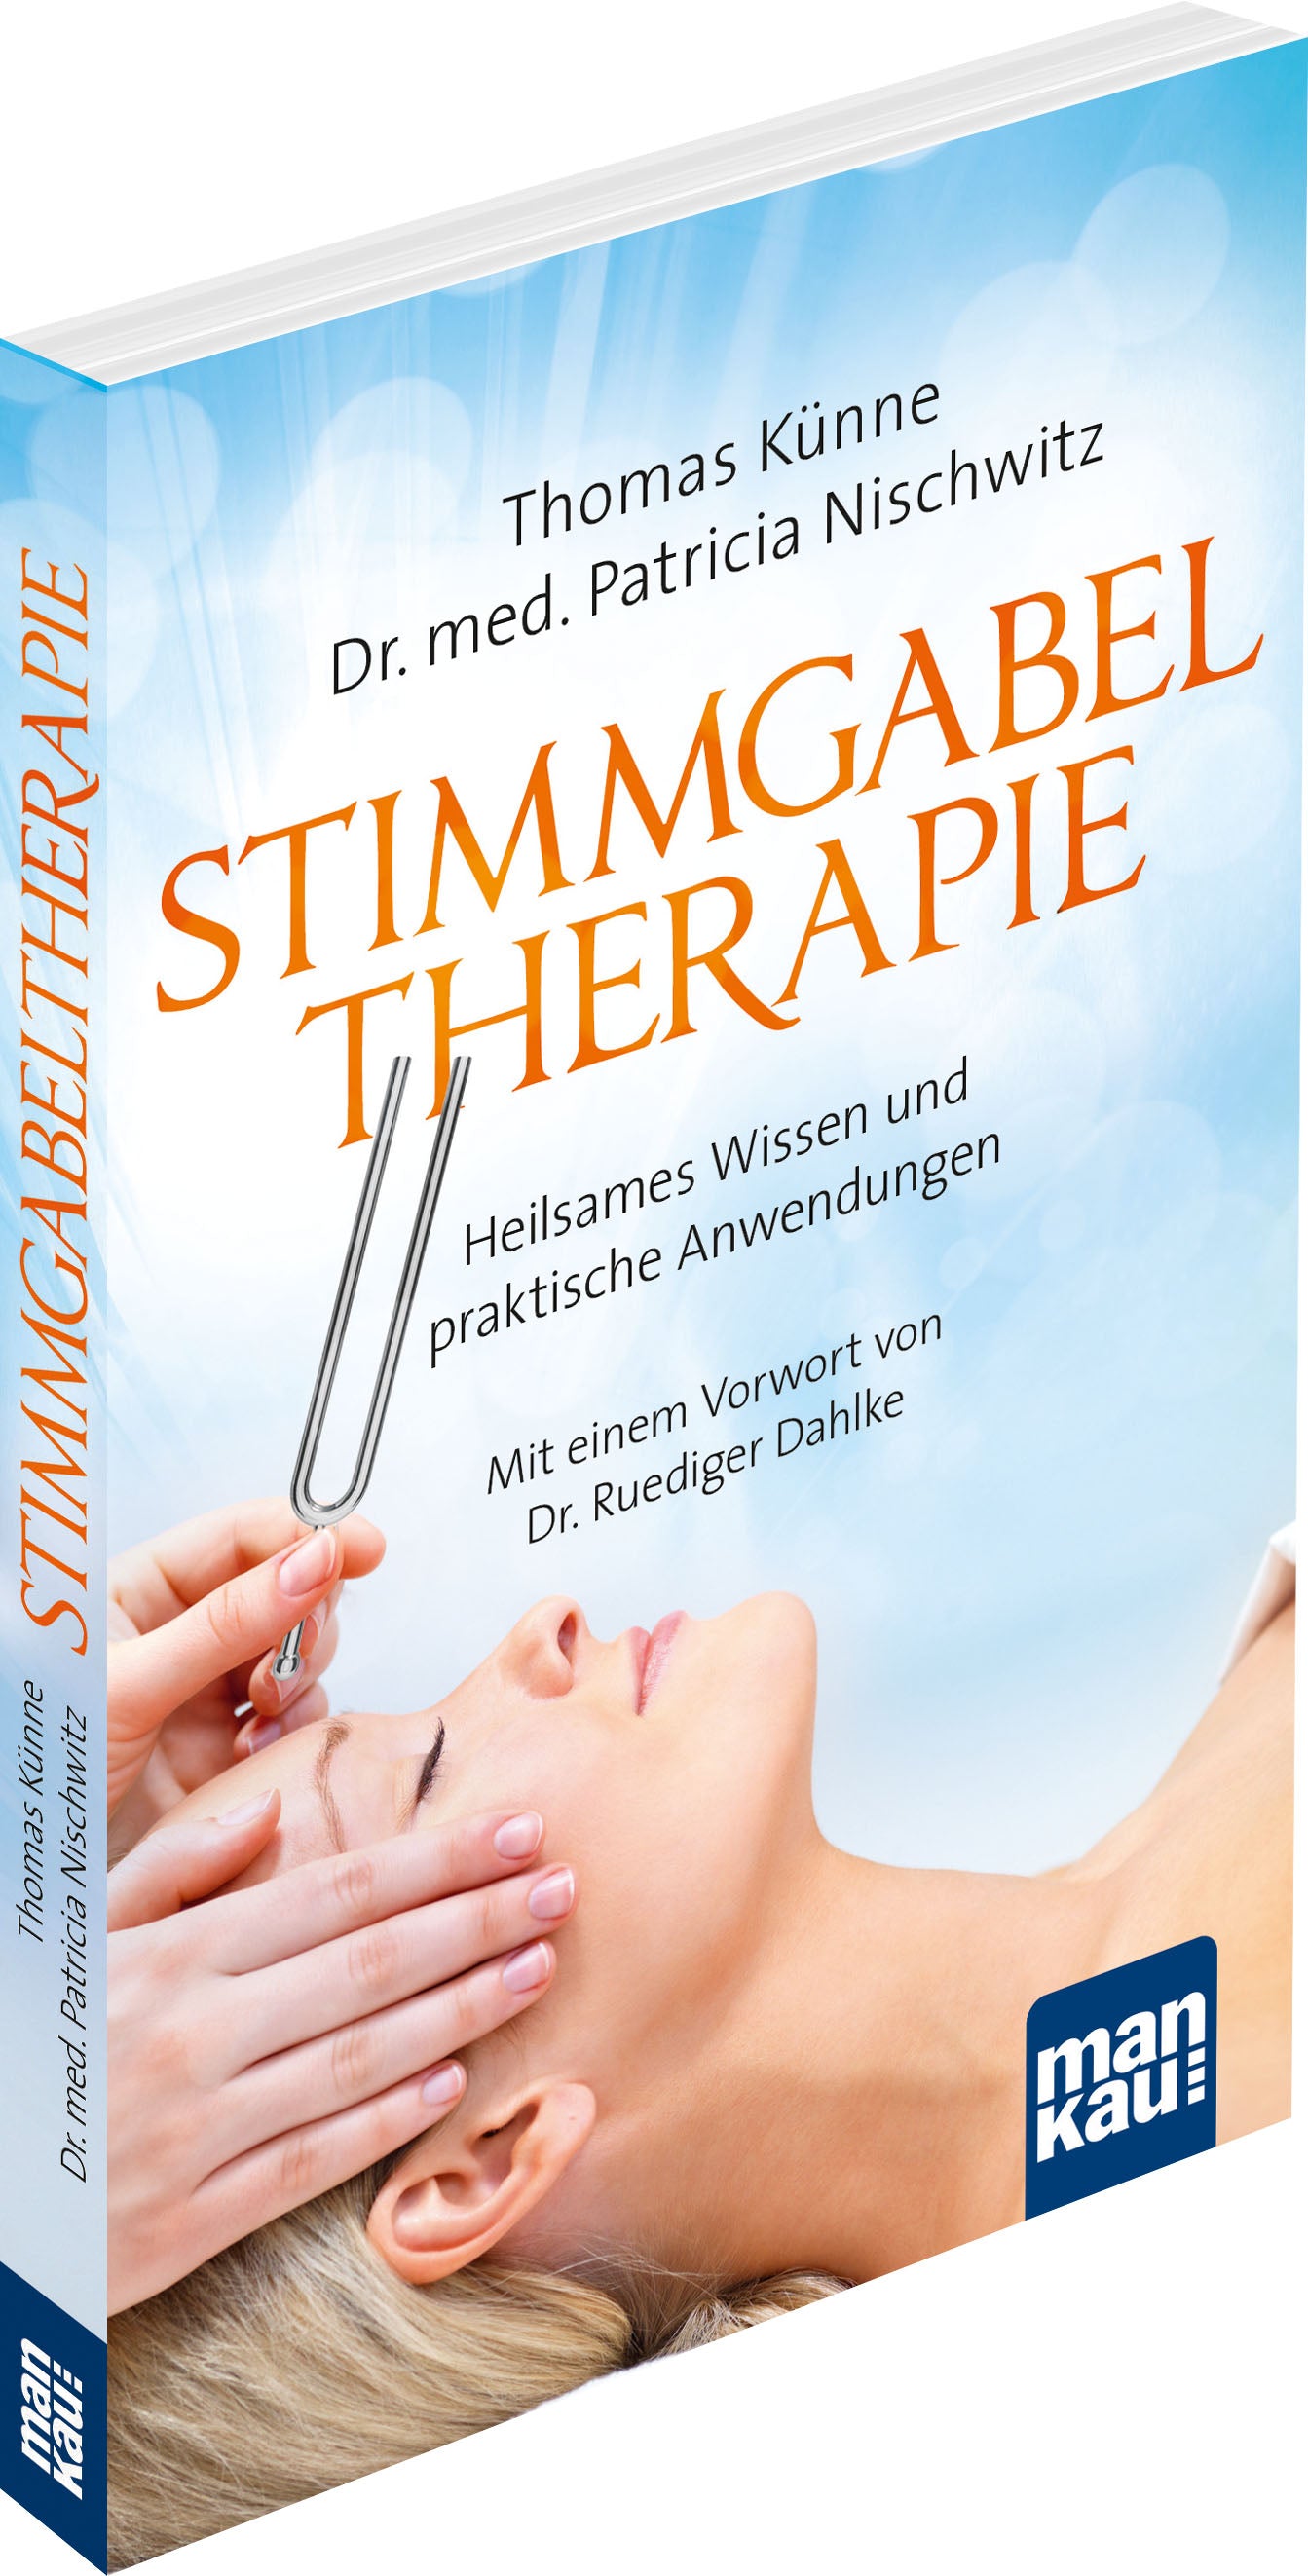 Tuning fork therapy | Healing knowledge and practical applications.